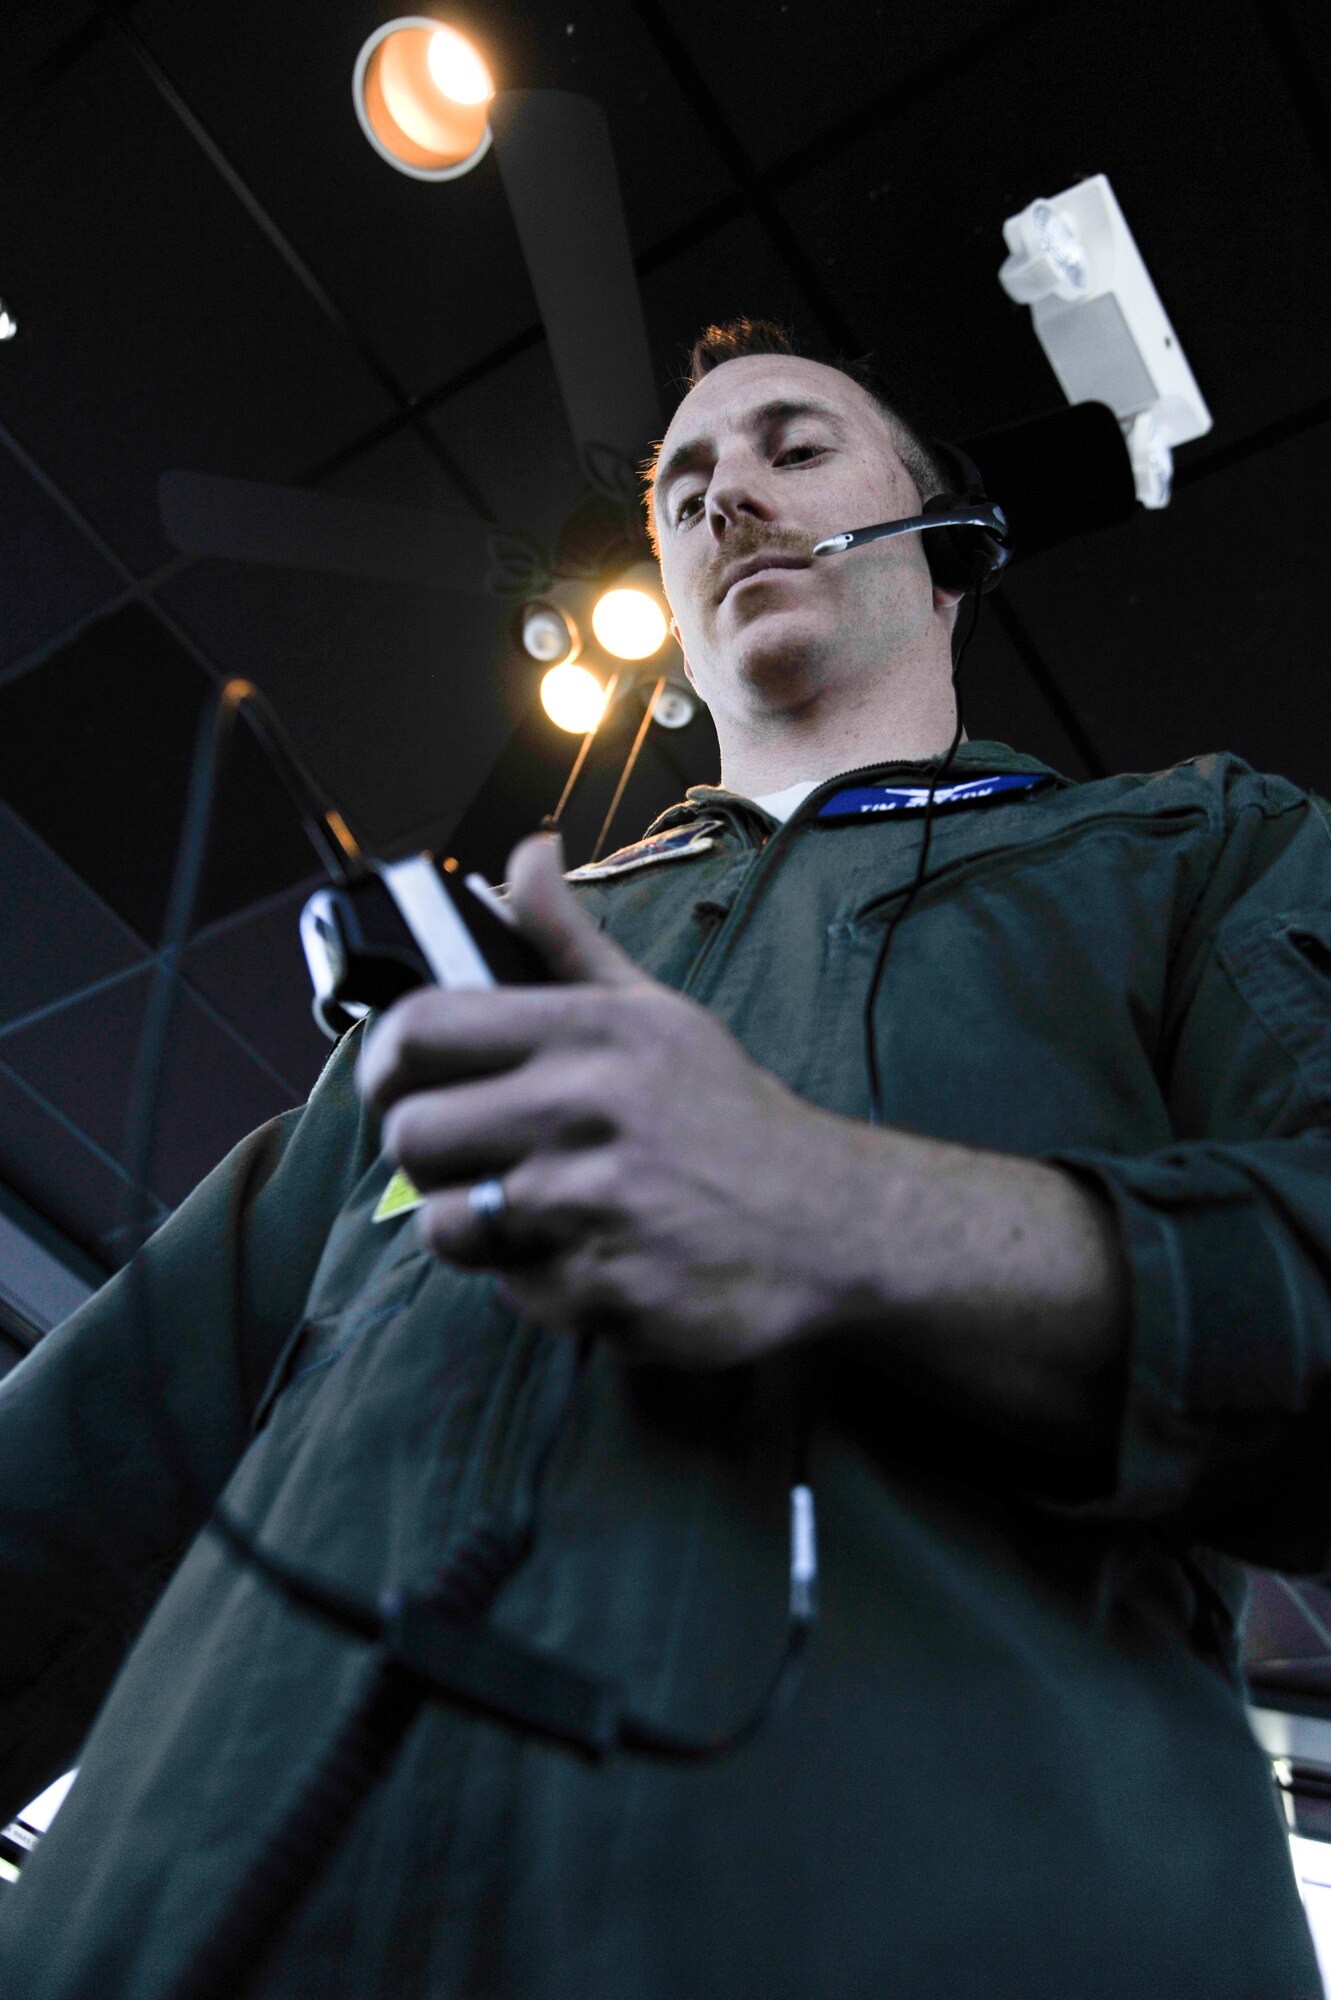 Major Tim Sutton, 509th Operations Support Squadron flying supervisor, communicates using a headset at Whiteman Air Force Base, Mo., March 11, 2013. Air traffic controllers rely on headsets to deliver their messages concerning take-off and landing statuses. (U.S. Air Force photo by Airman 1st Class Keenan Berry/Released)